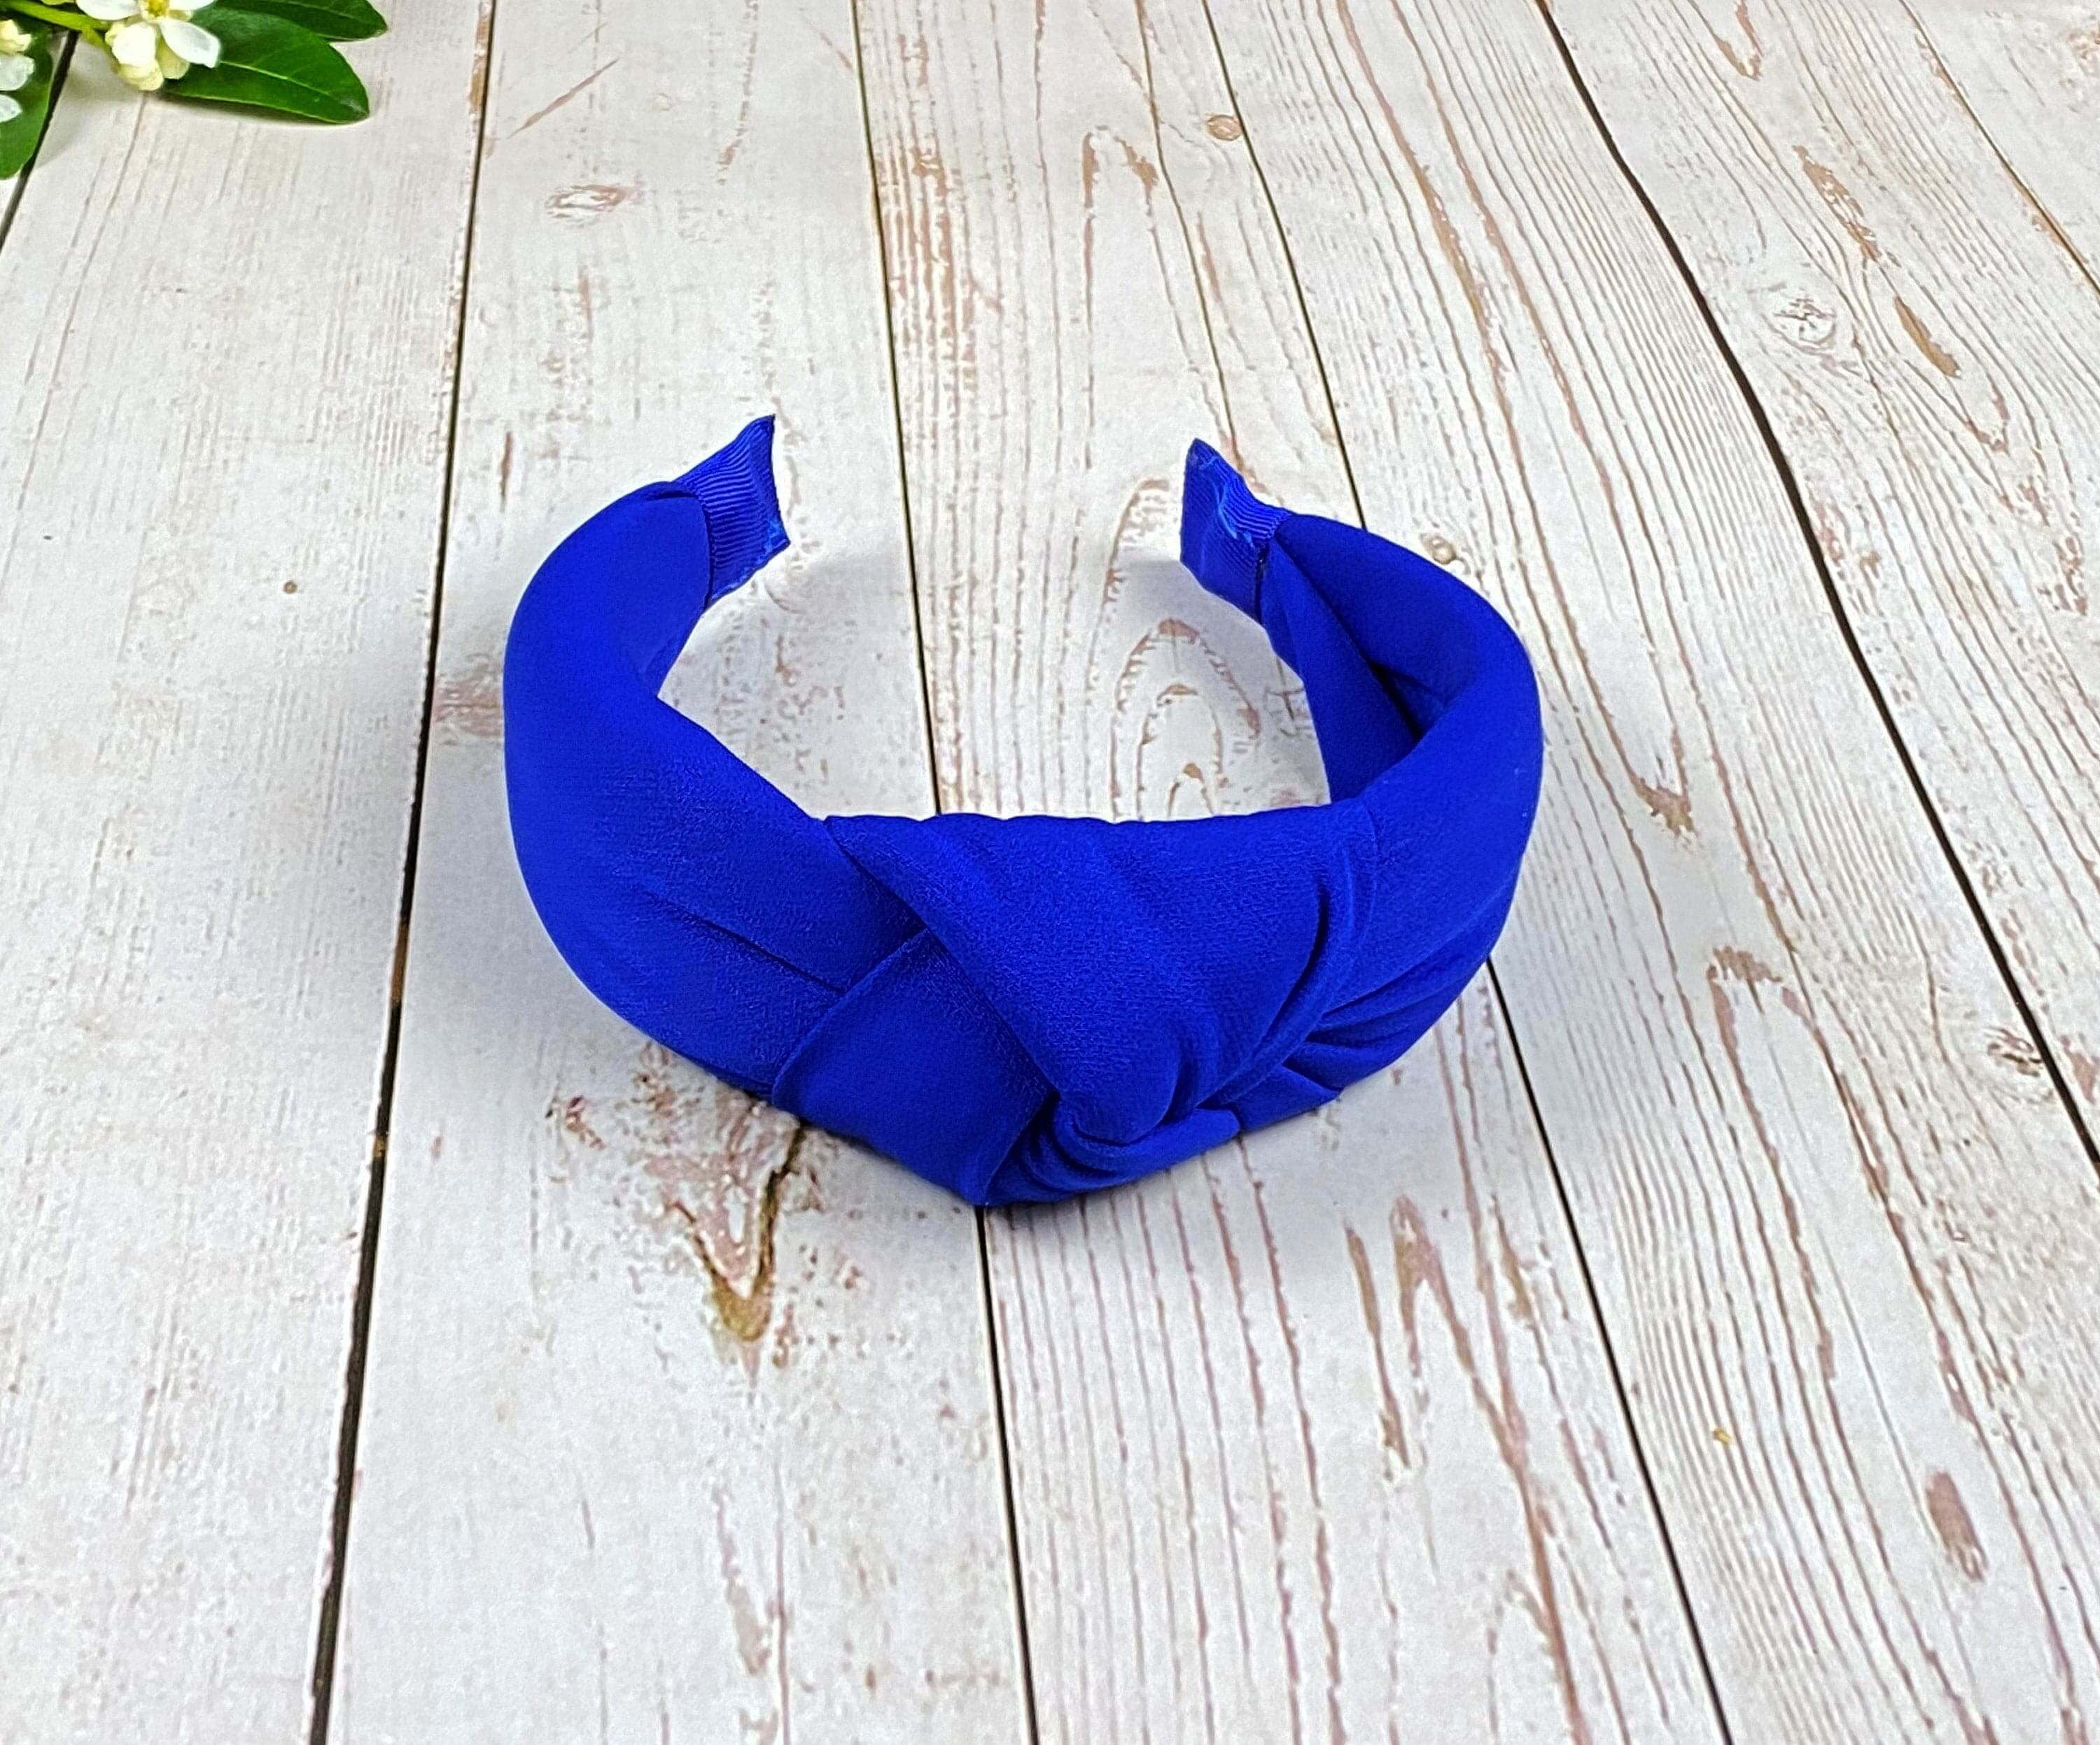 Protect your locks from the sun with a fashionable hairband like the parliament blue twist knot headband. Made from soft and durable viscose crepe, this headband will keep your hair looking beautiful while protecting it from the sun.